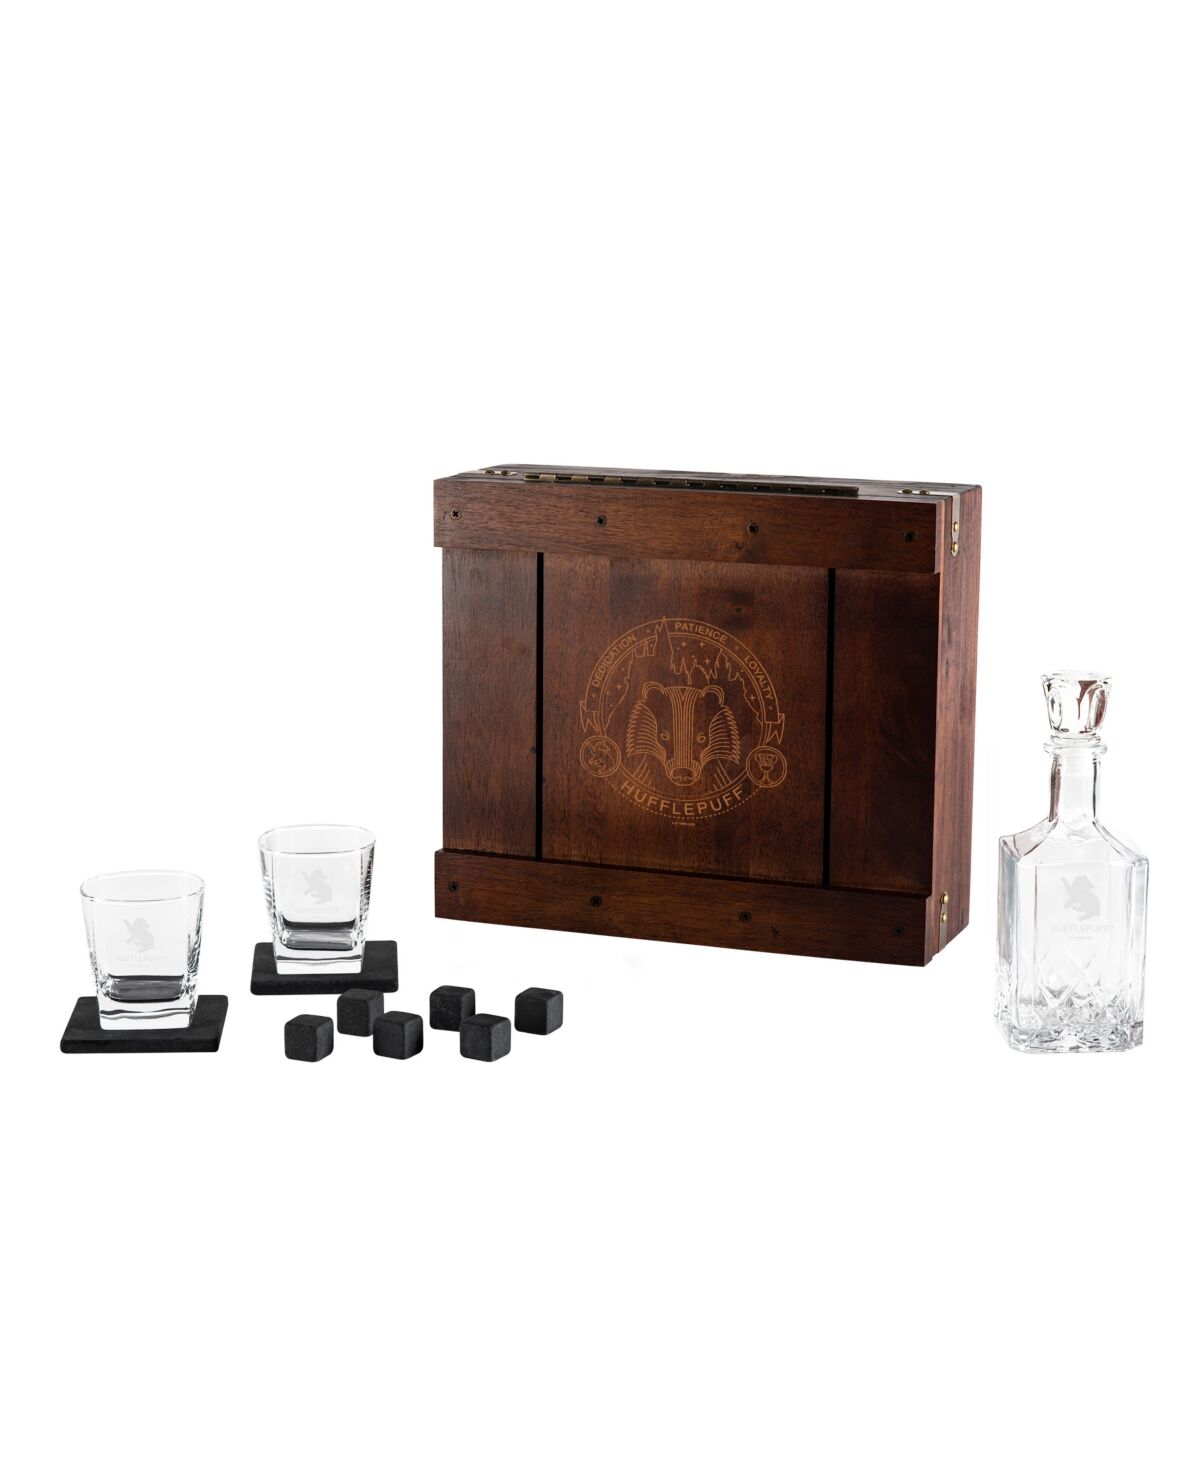 Legacy Harry Potter Hufflepuff Whiskey Box Gift 12 Piece Set with Decanter - Oak